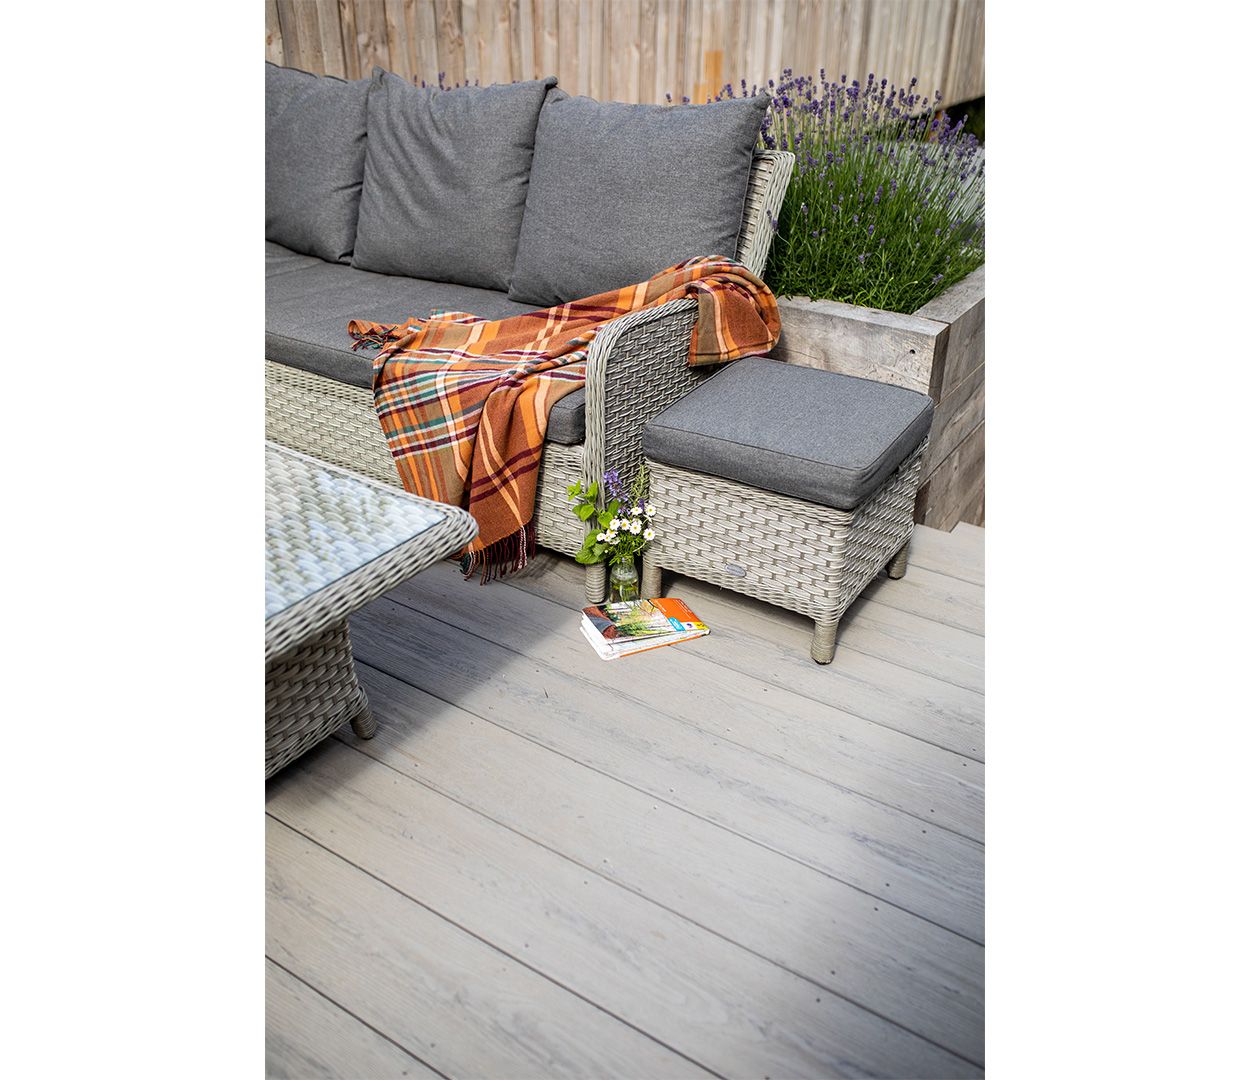 Make more of the outdoors with Cladco Premium PVC Decking Boards